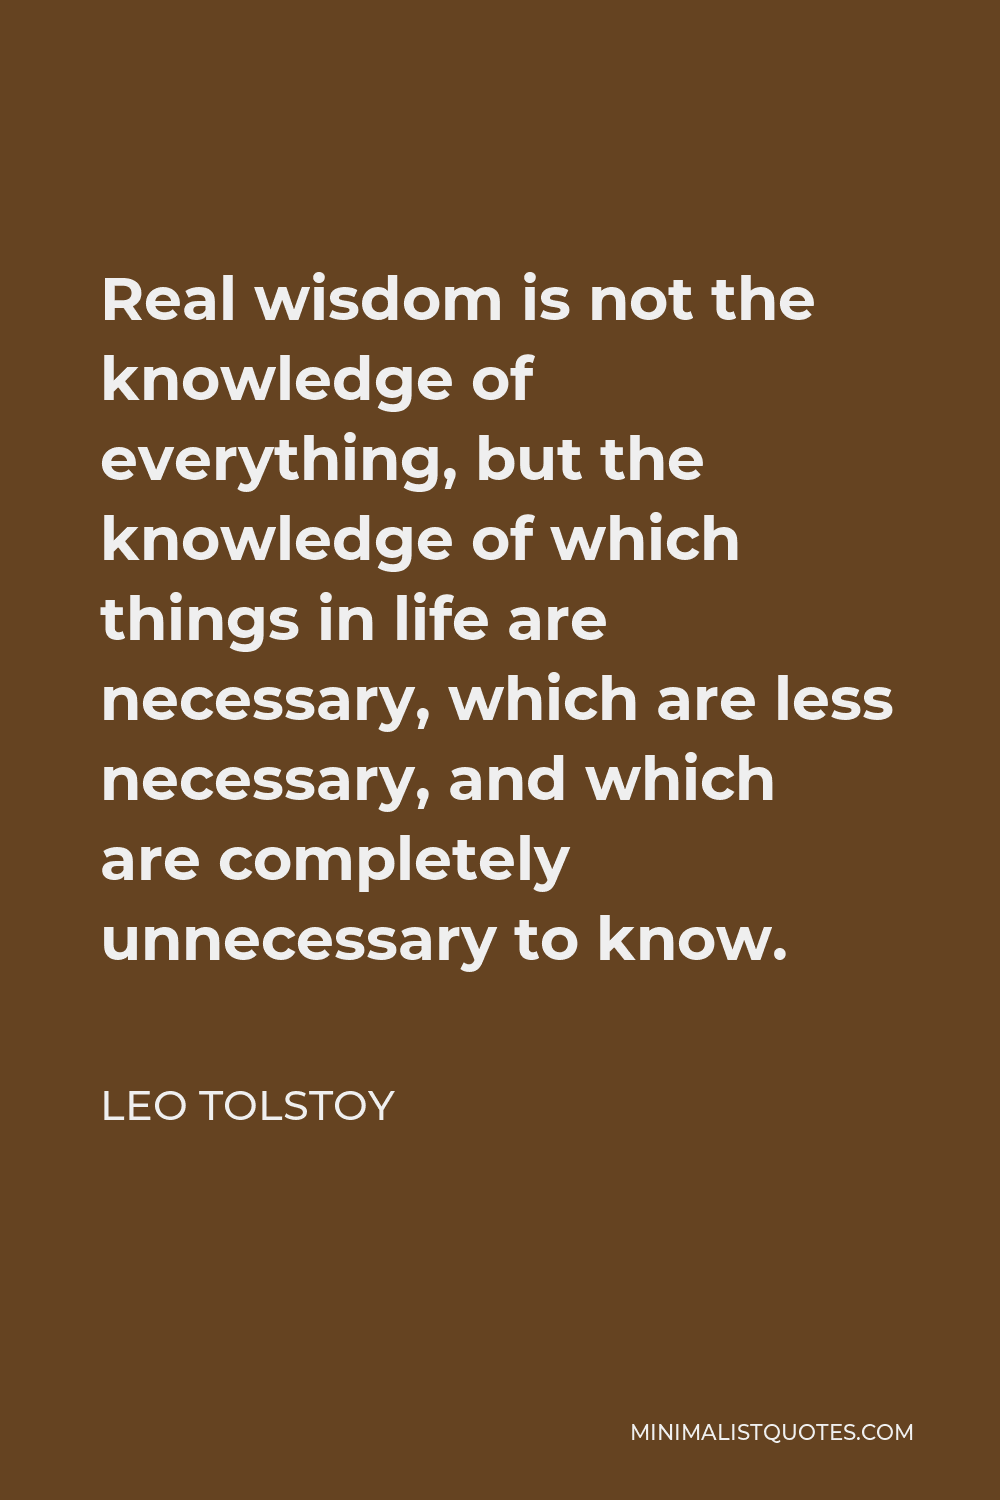 Leo Tolstoy Quote - Real wisdom is not the knowledge of everything, but the knowledge of which things in life are necessary, which are less necessary, and which are completely unnecessary to know.